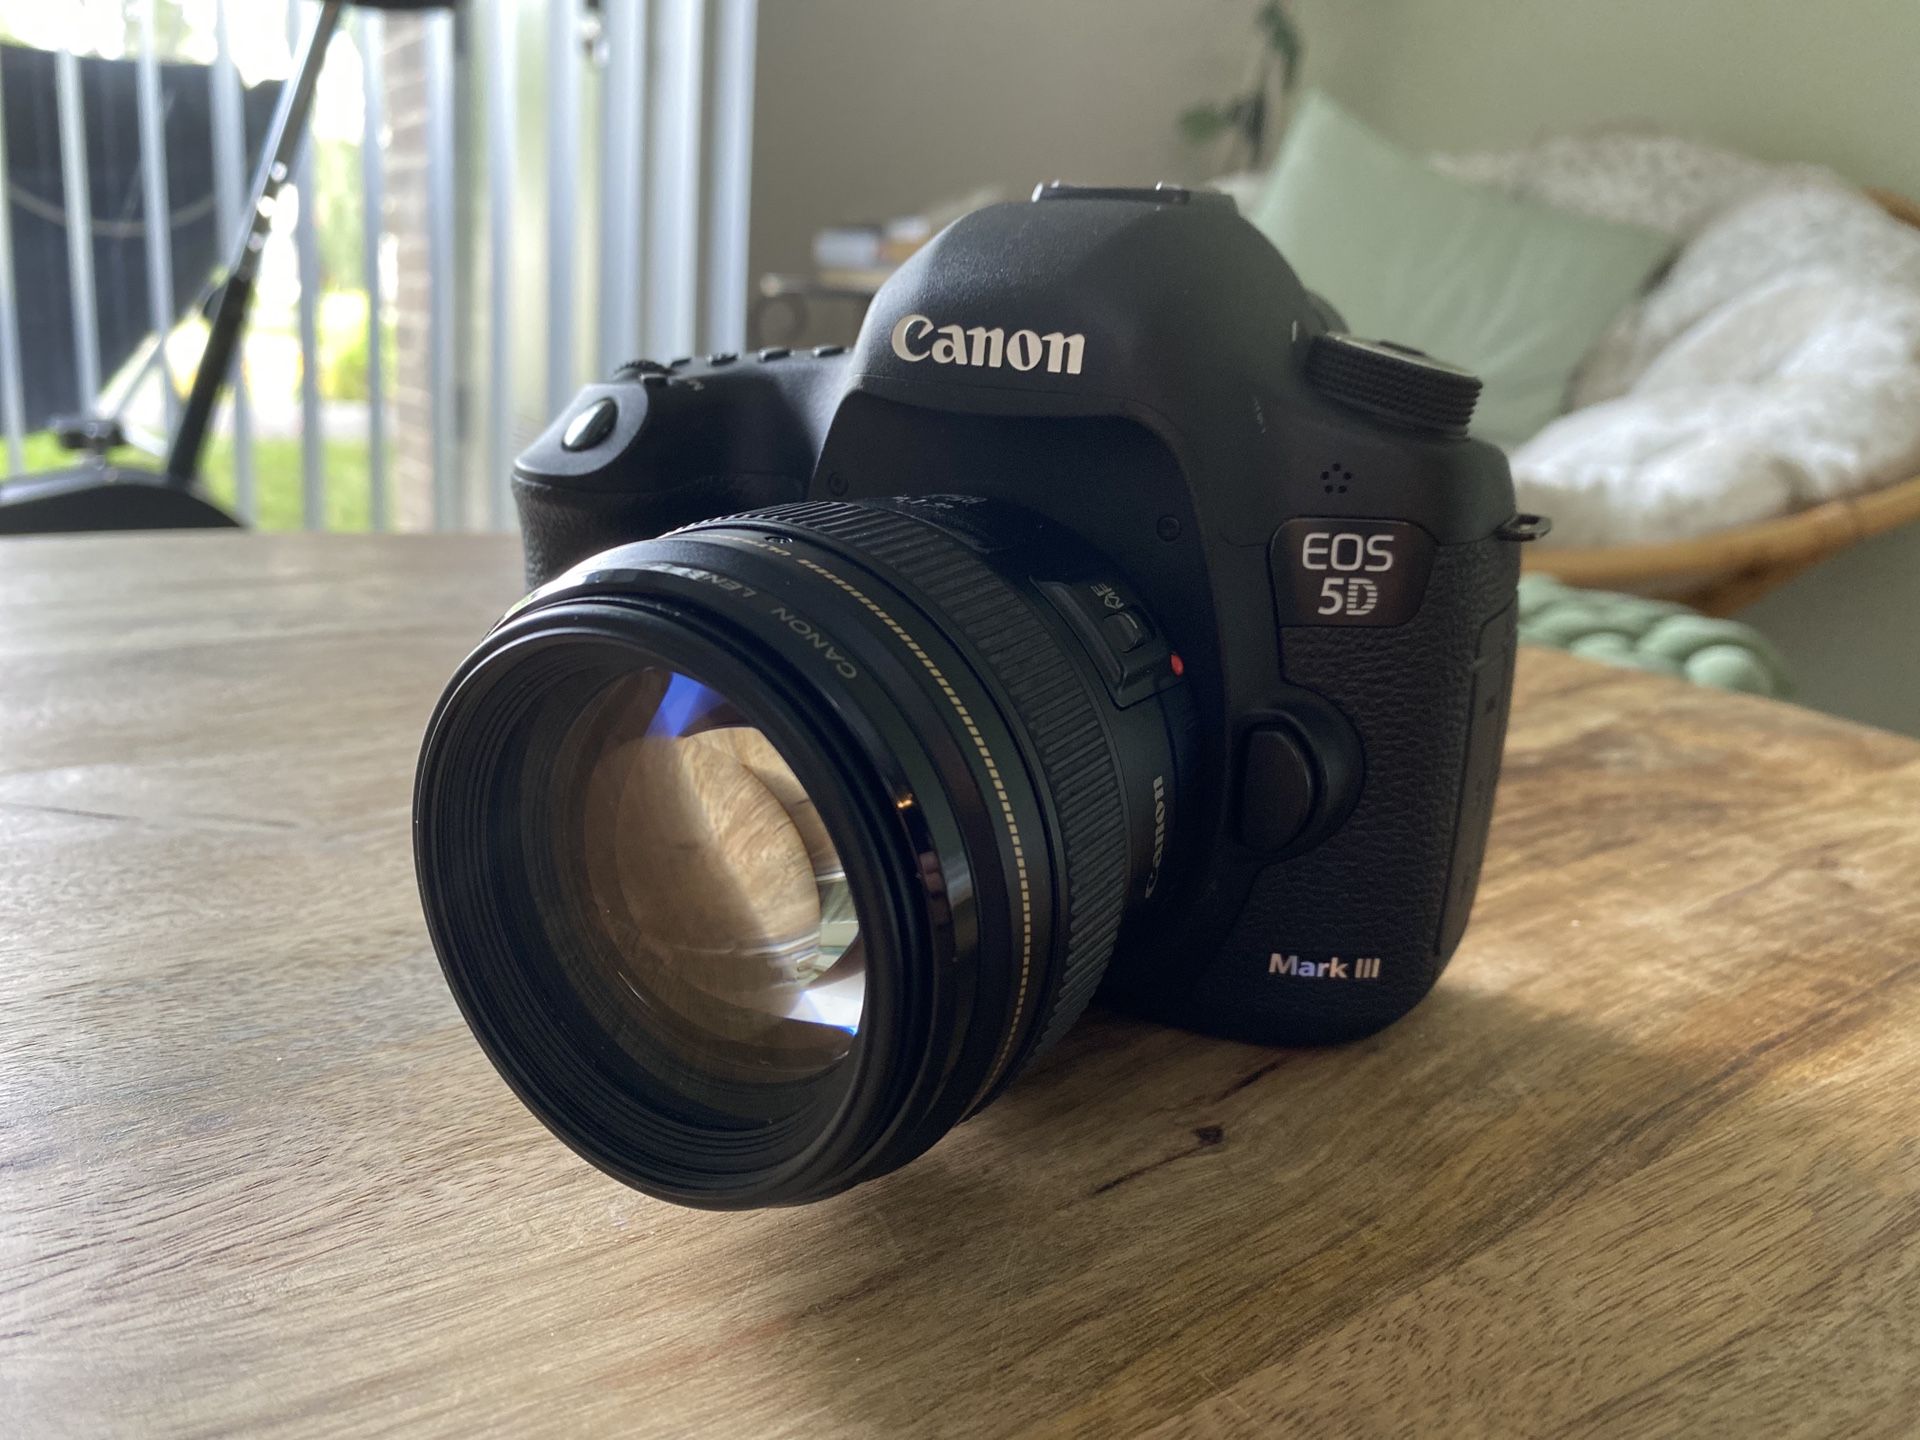 Canon 5D Mark III DSLR with a 1.8 85mm lens